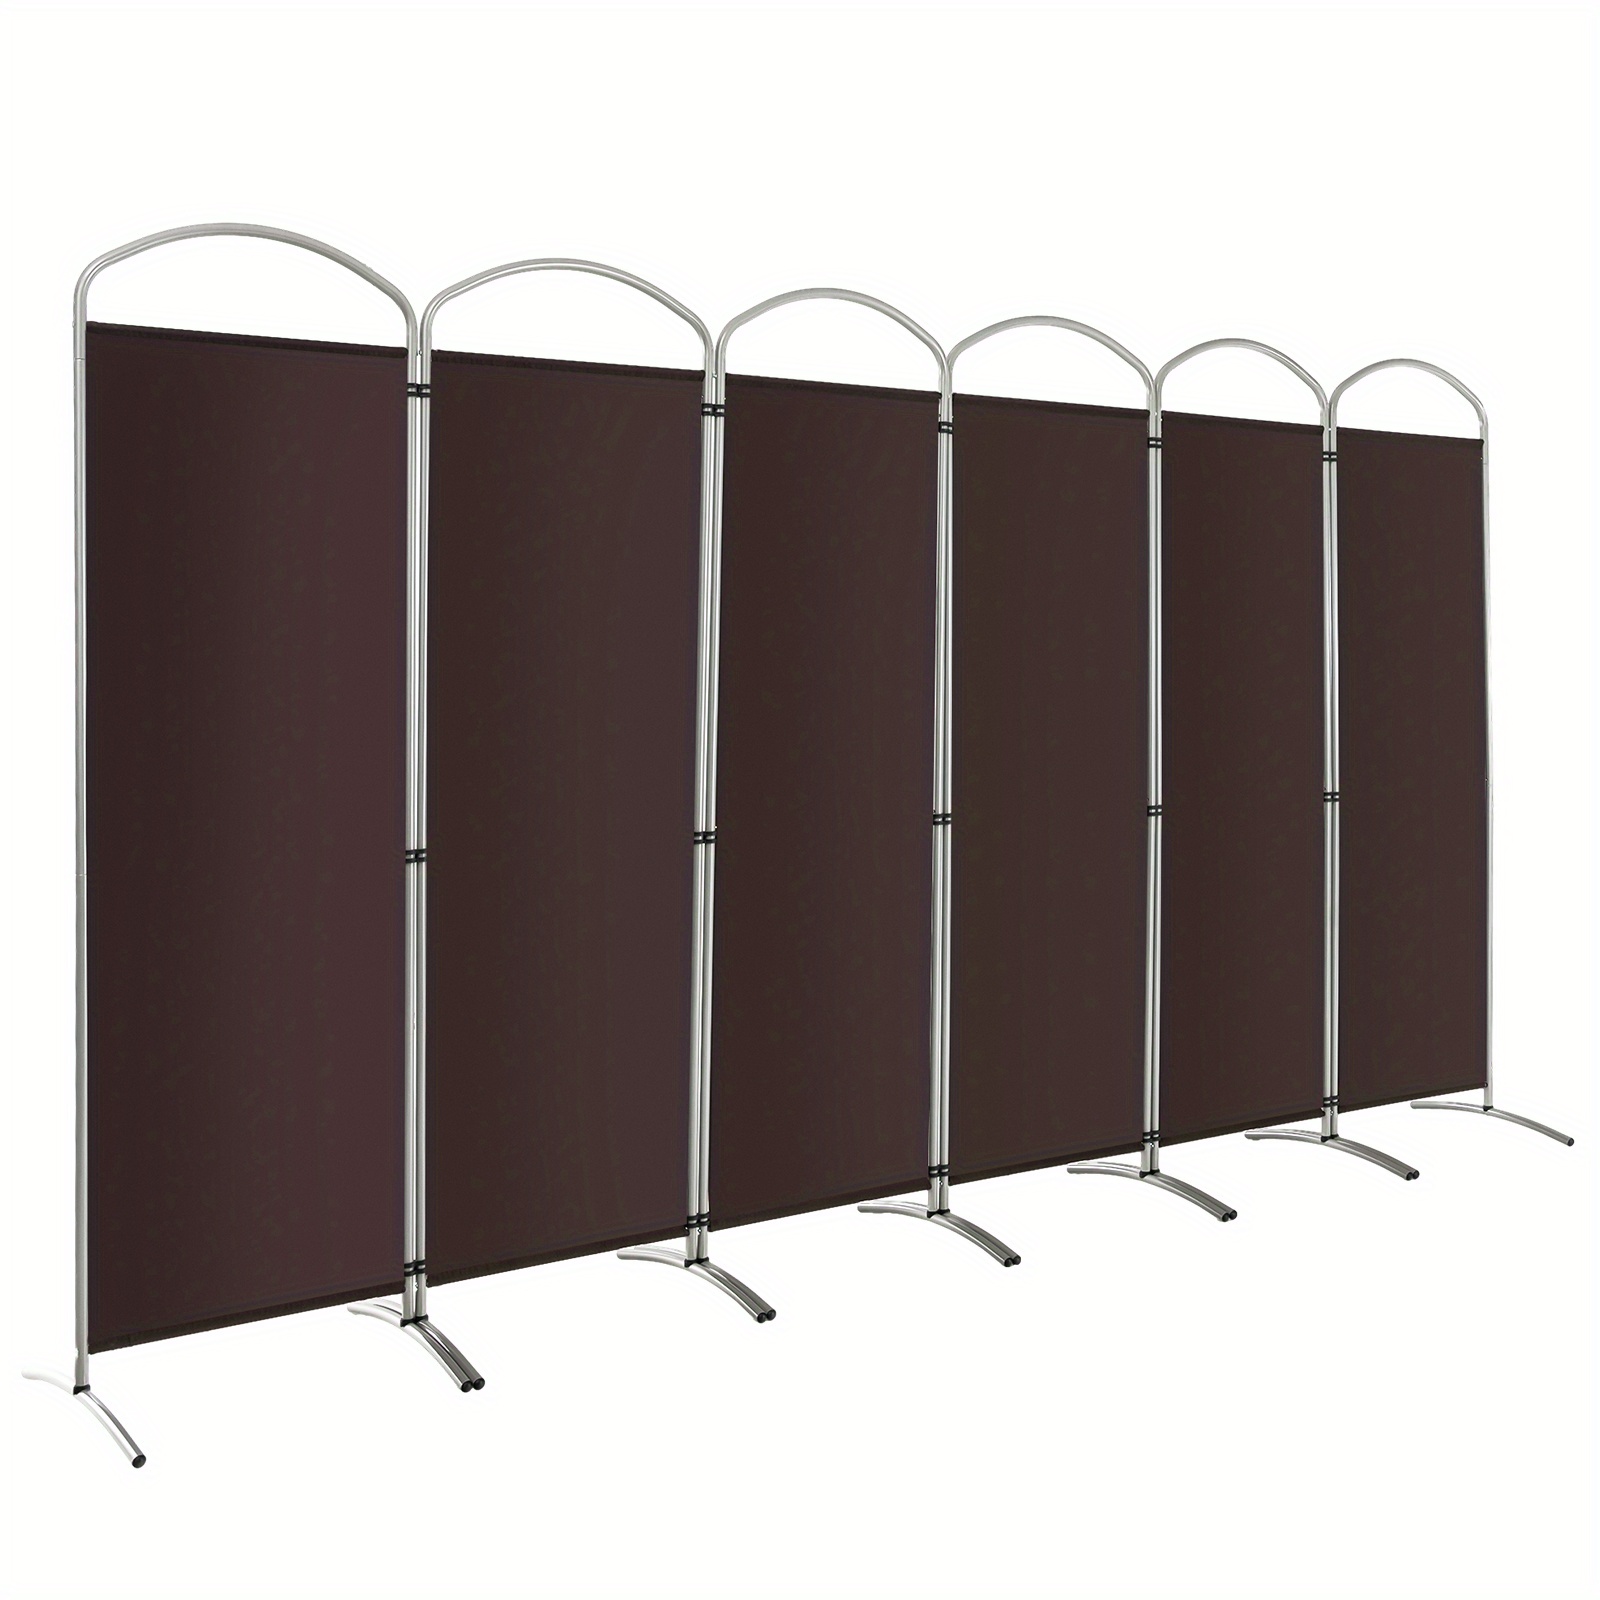 

Lifezeal 6 Panels Folding Privacy Screen 6 Ft Tall Fabric Privacy Screen For Home Brown